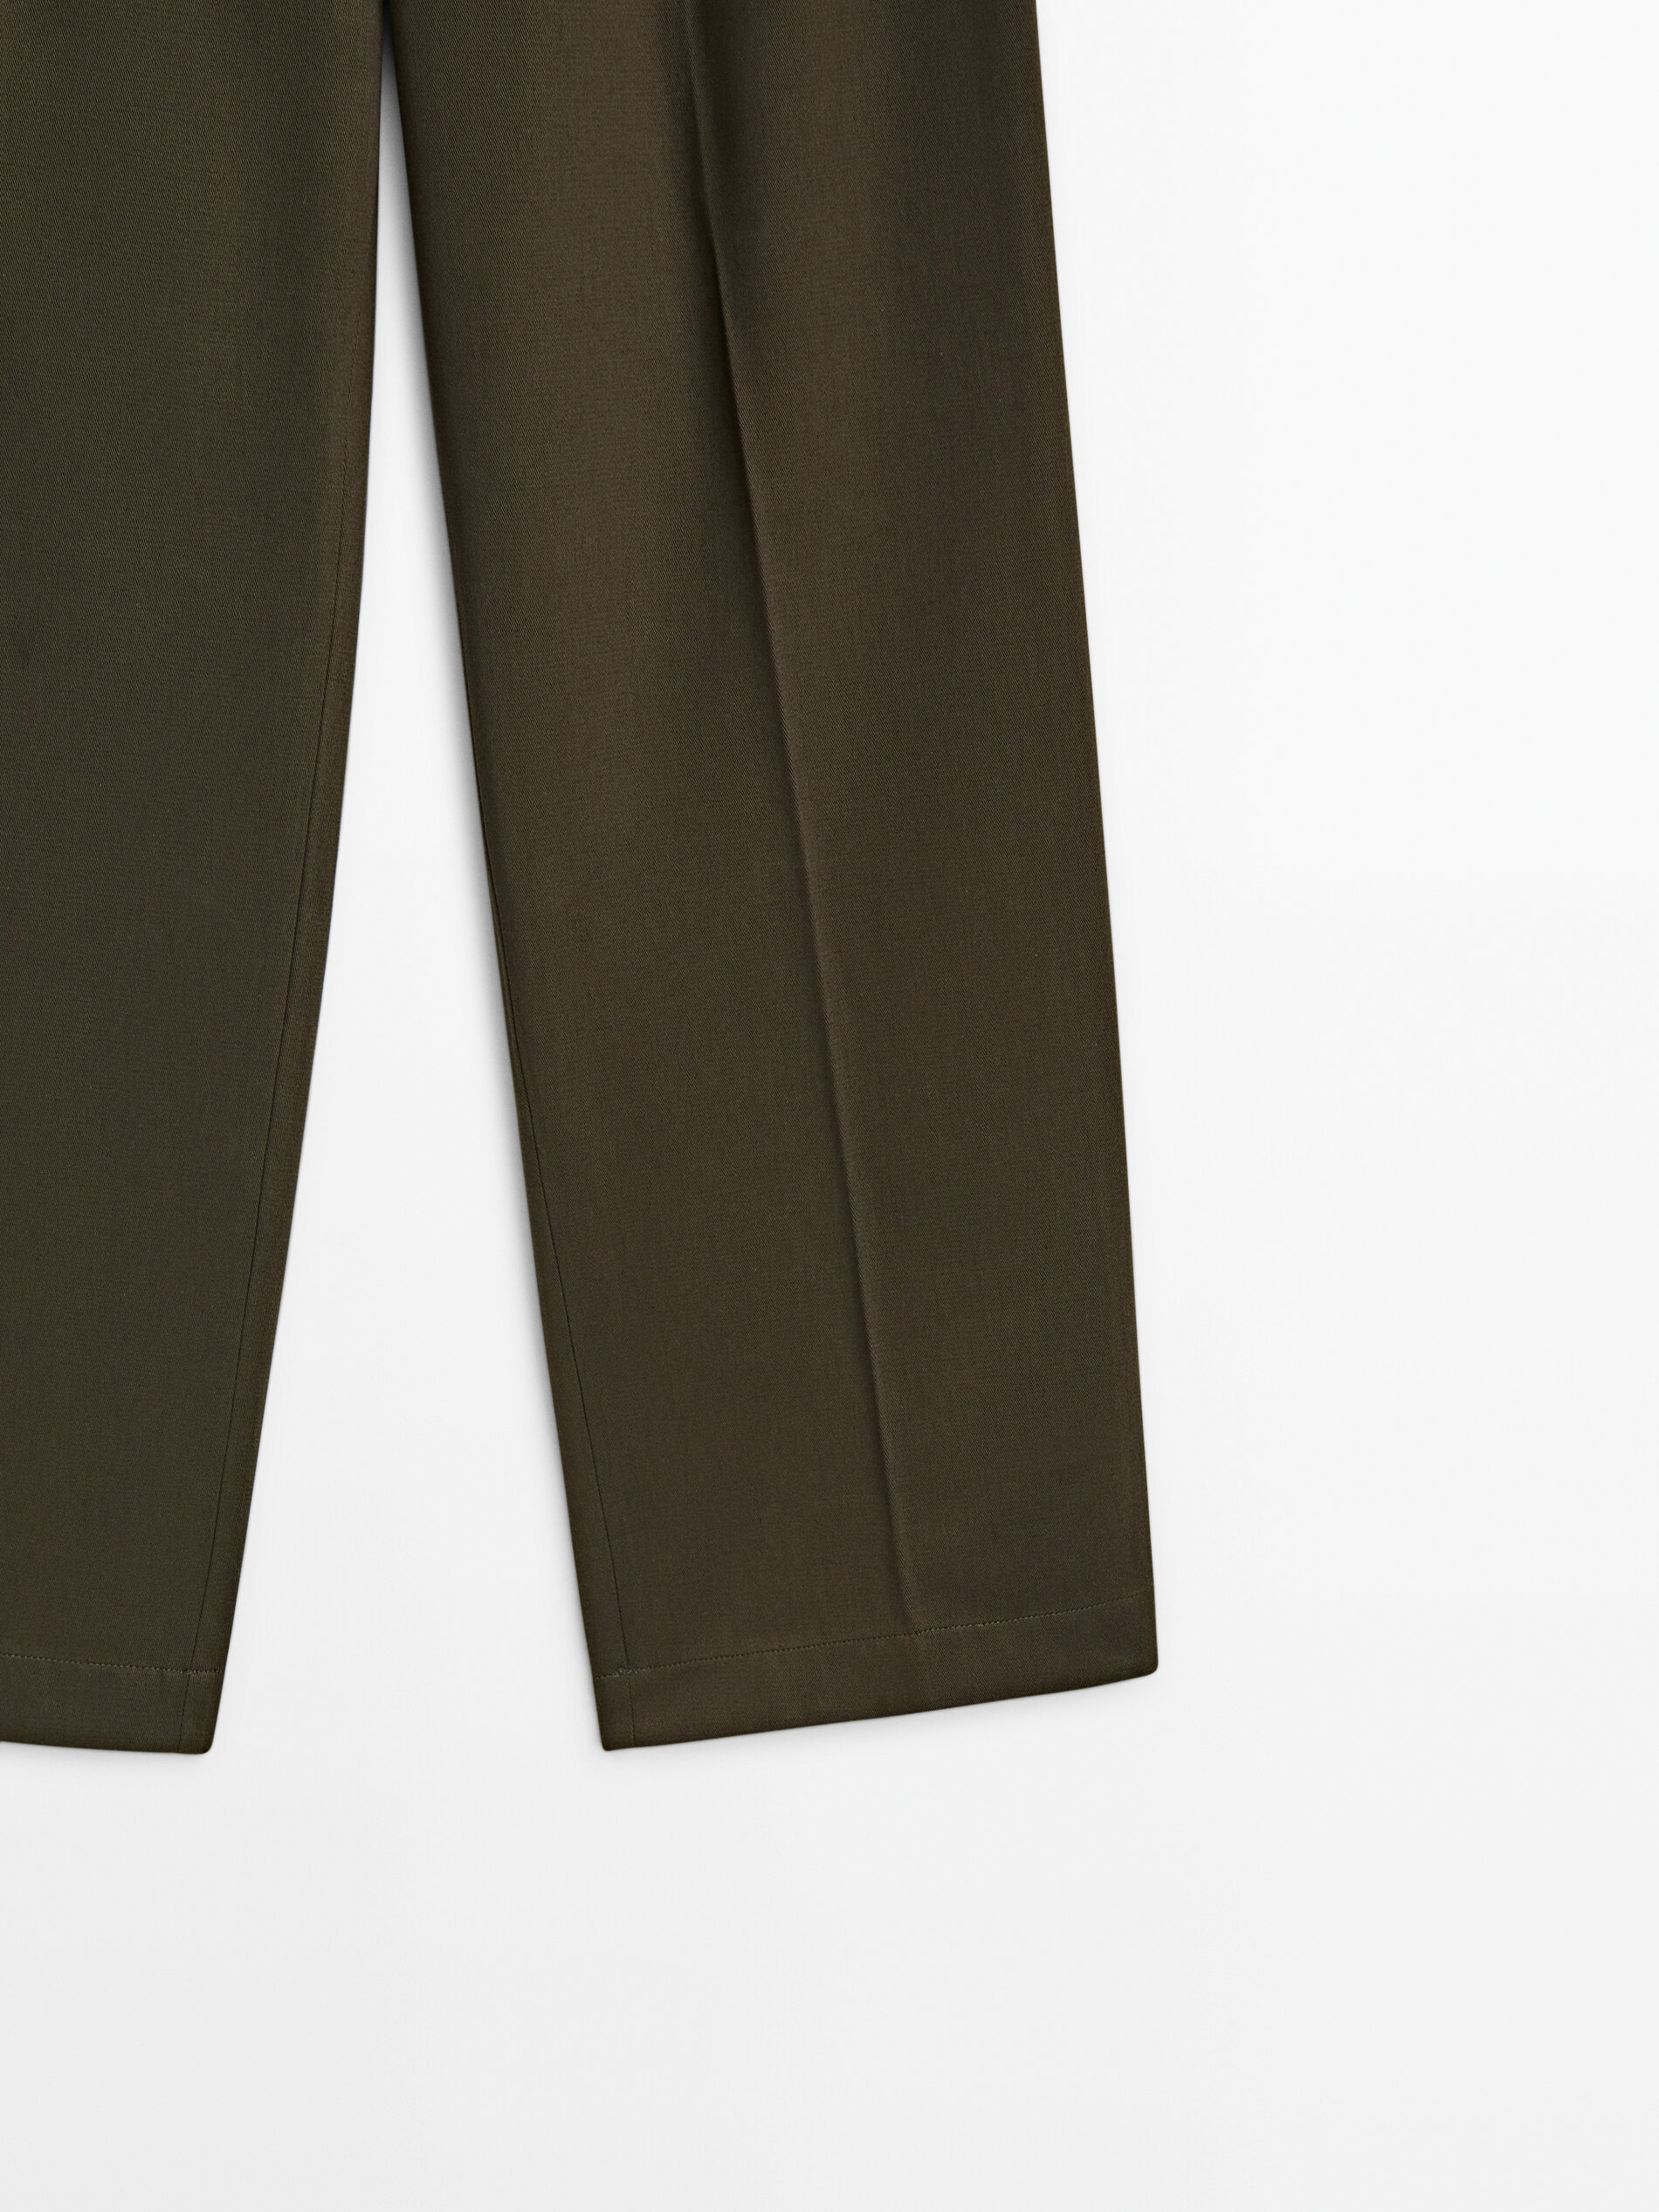 The Essential Brooks Brothers Stretch Pleat-Front Wide Leg Trousers